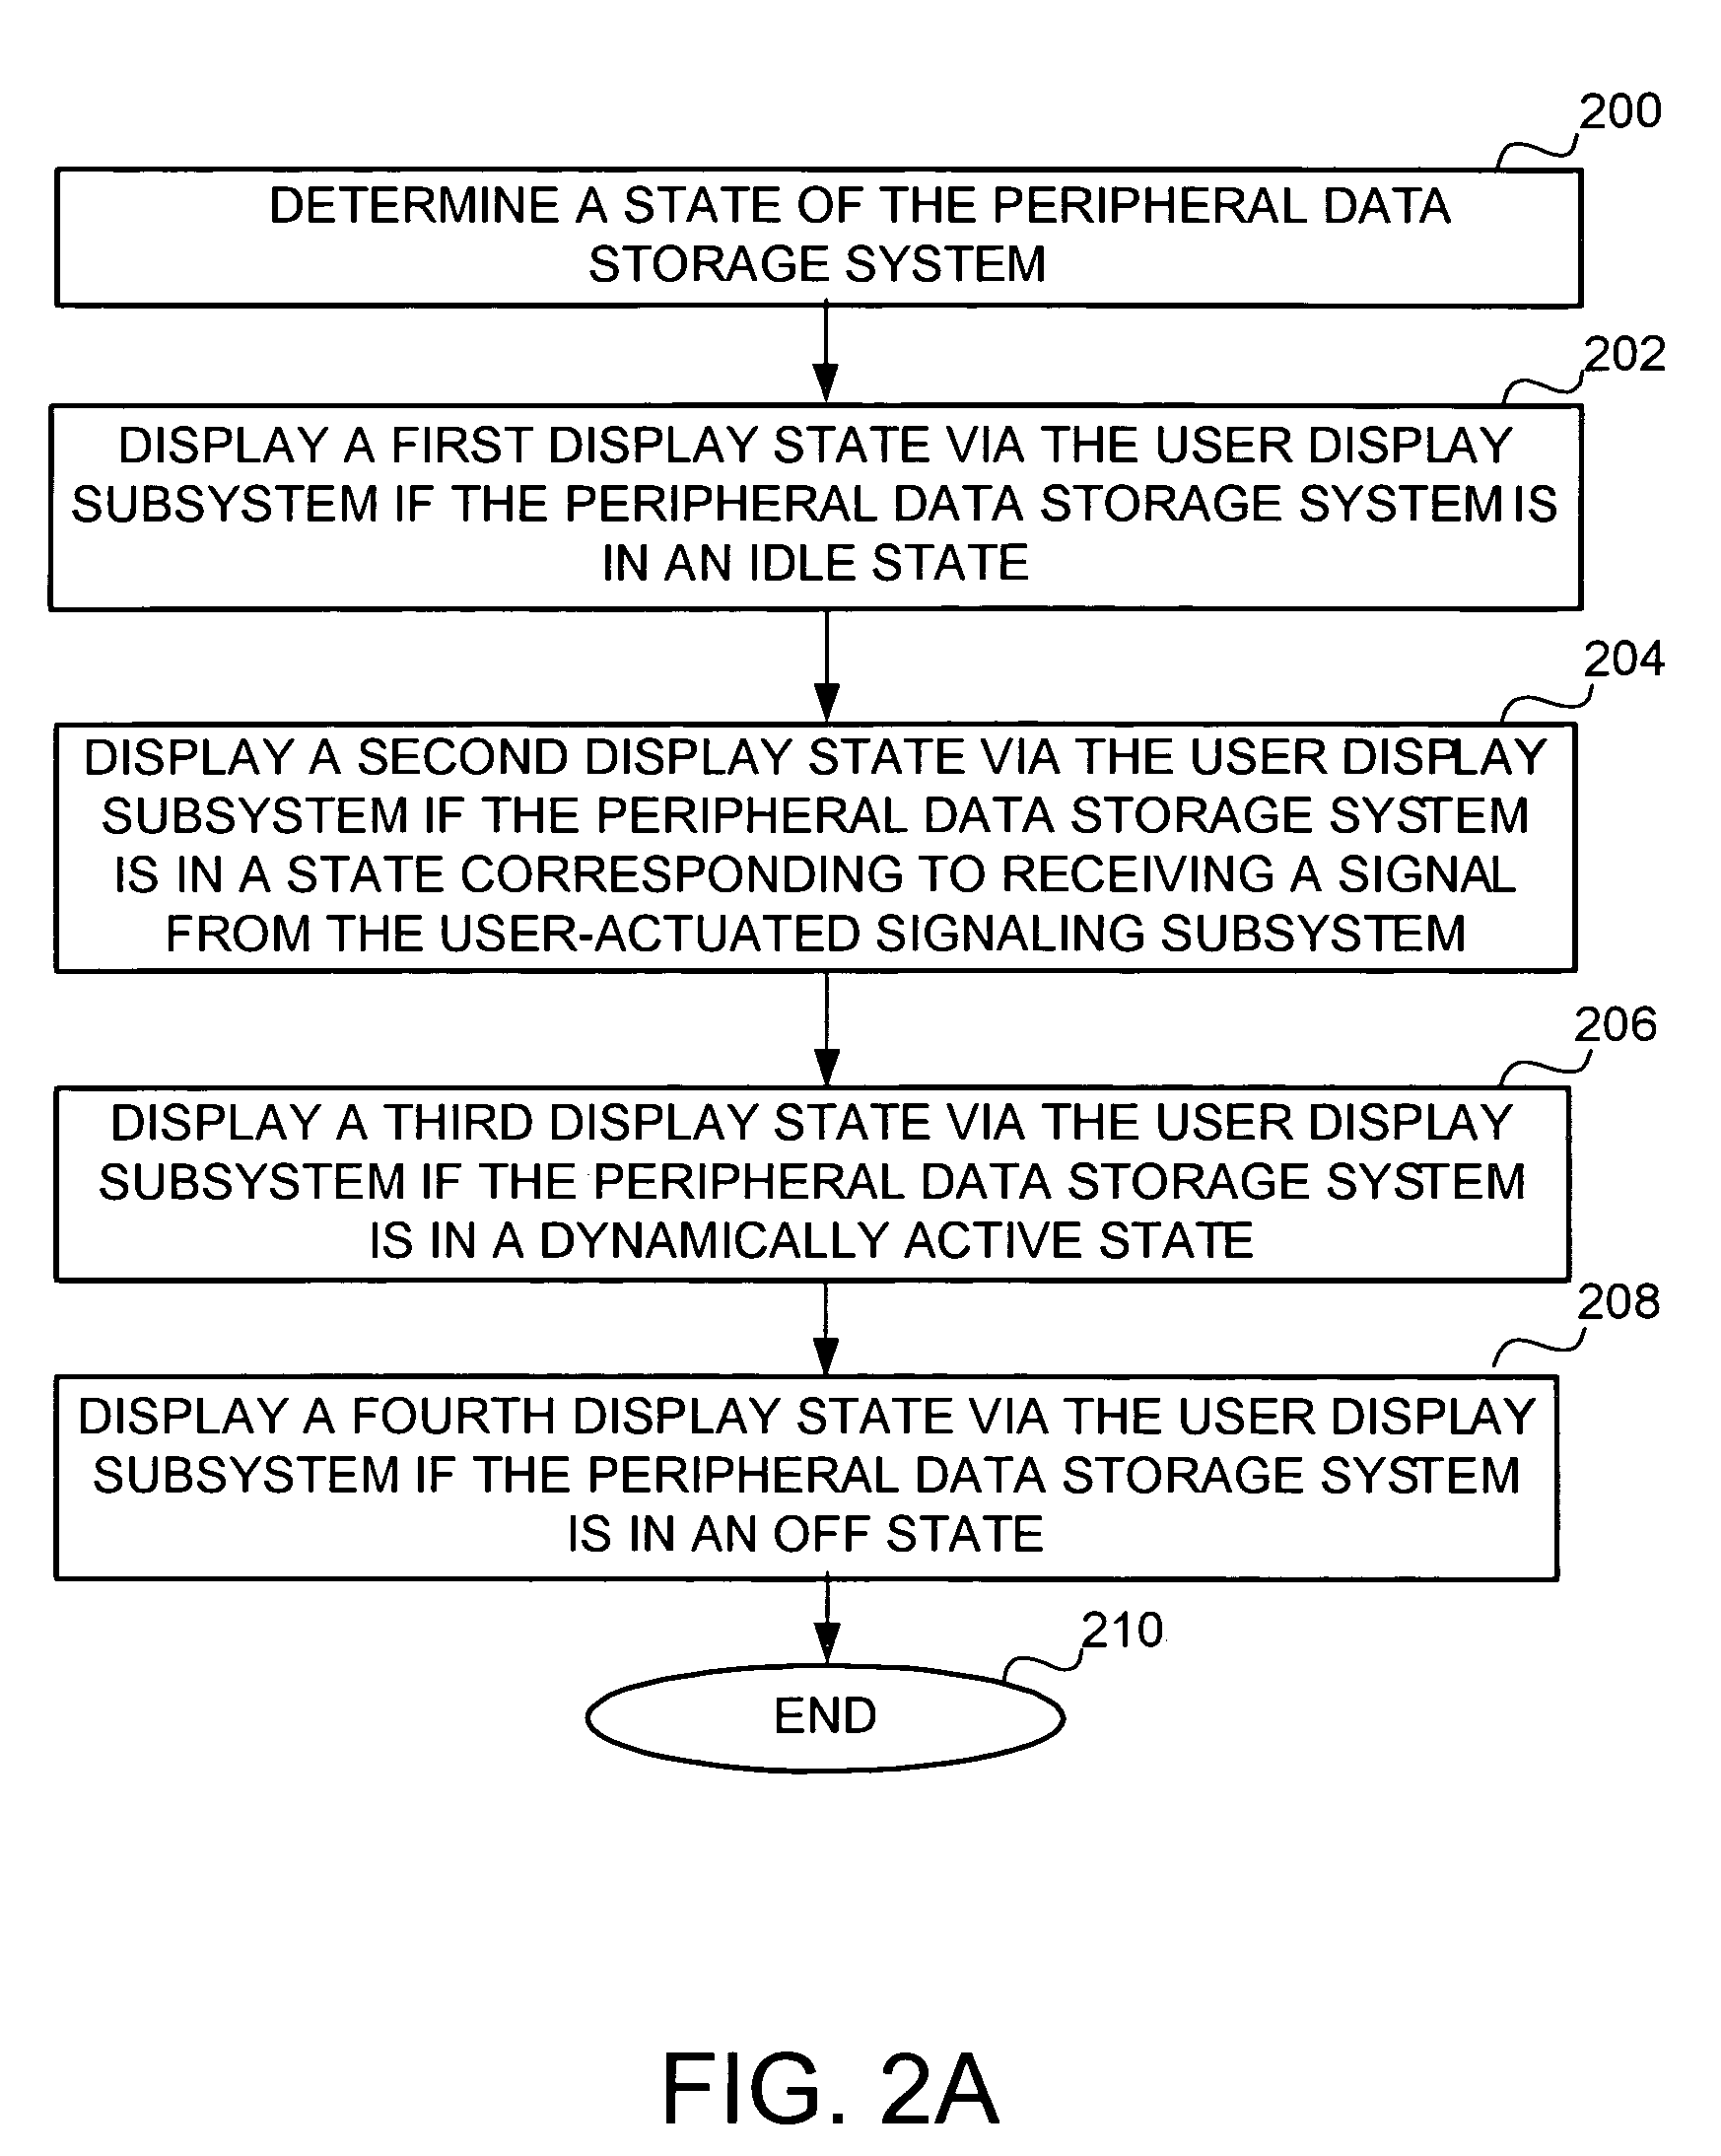 Peripheral data storage system with multi-state user display